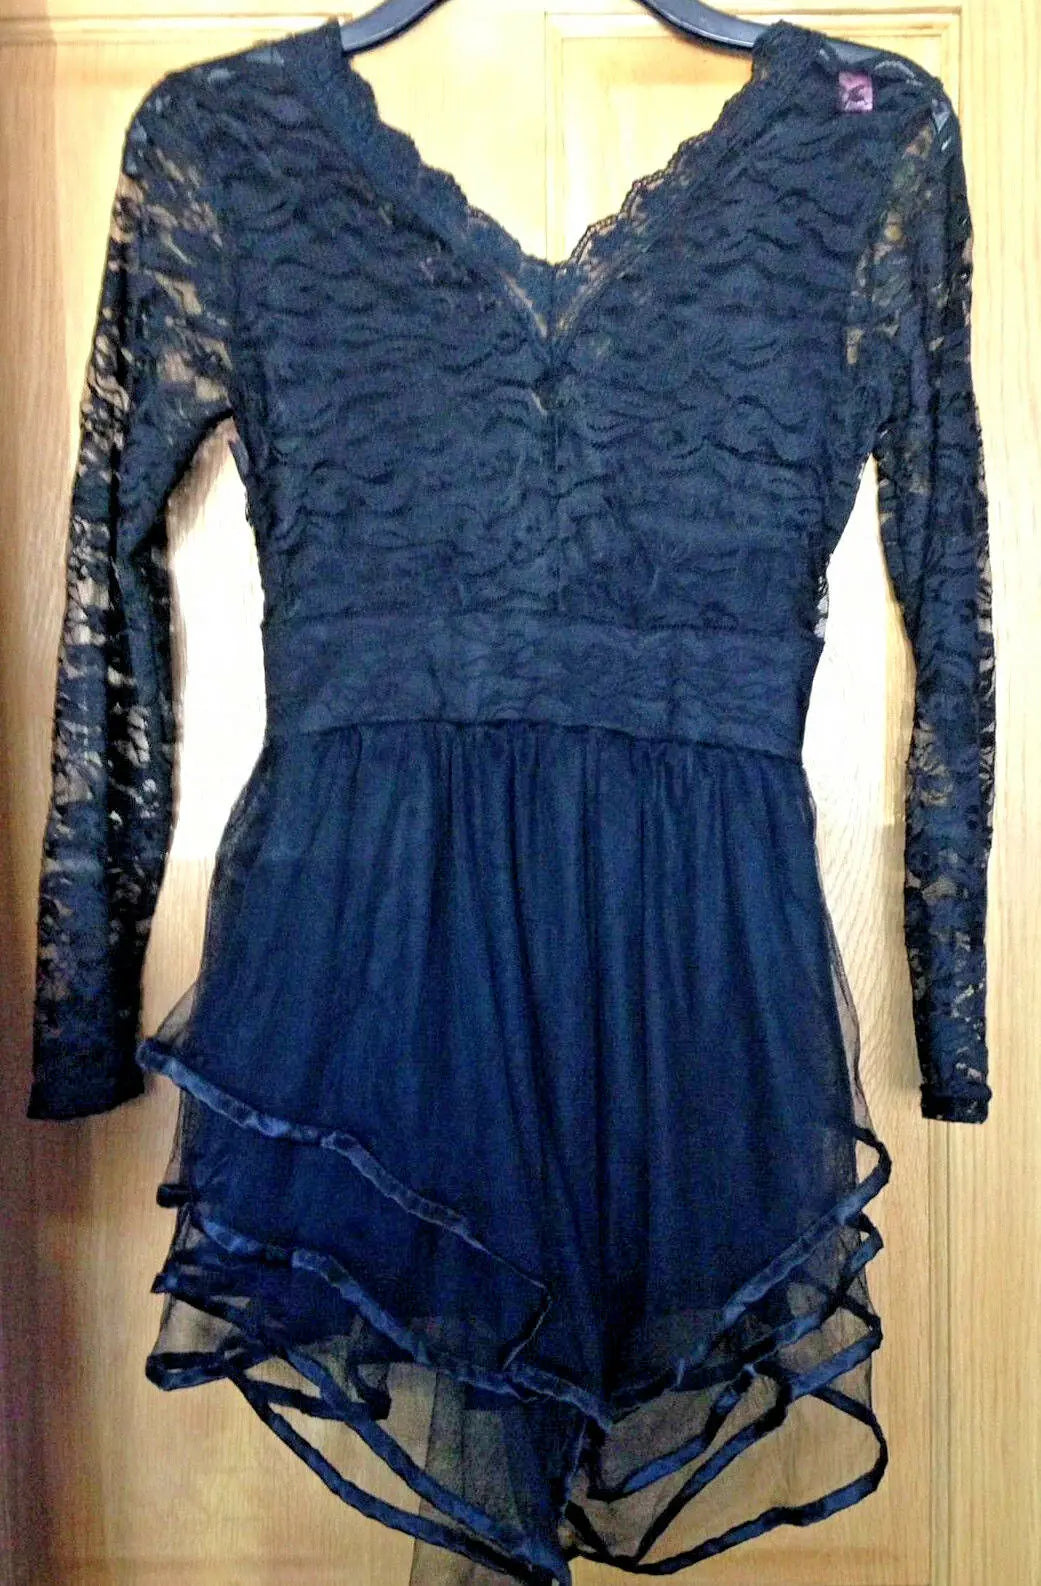 gorgous lace/tiered skirt Black Lace Goth Emo Party Dress size 8 Unbranded